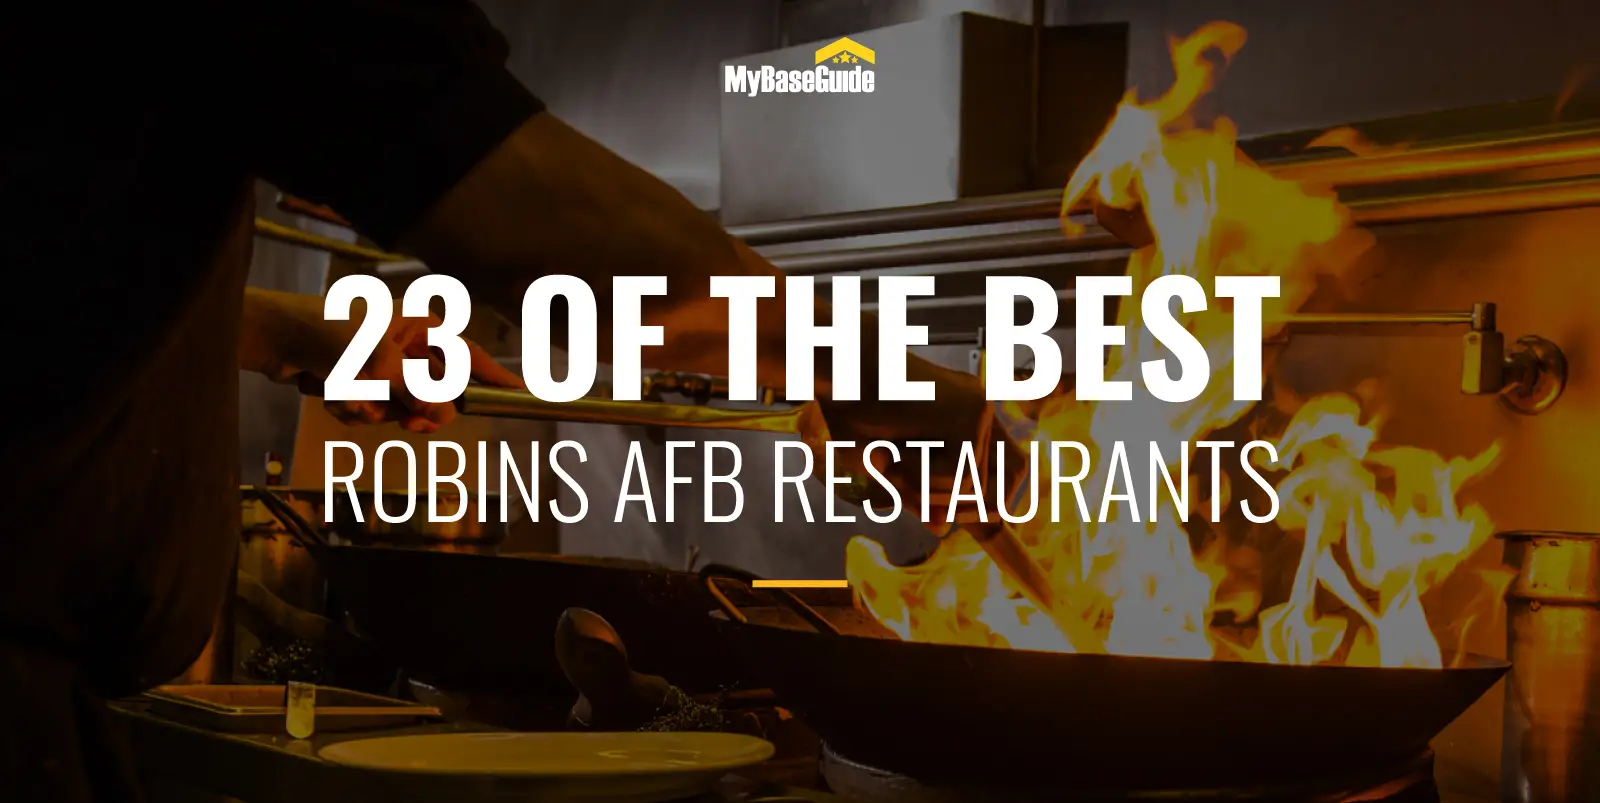 My Base Guide - 23 of the Best Robins AFB Base Restaurants